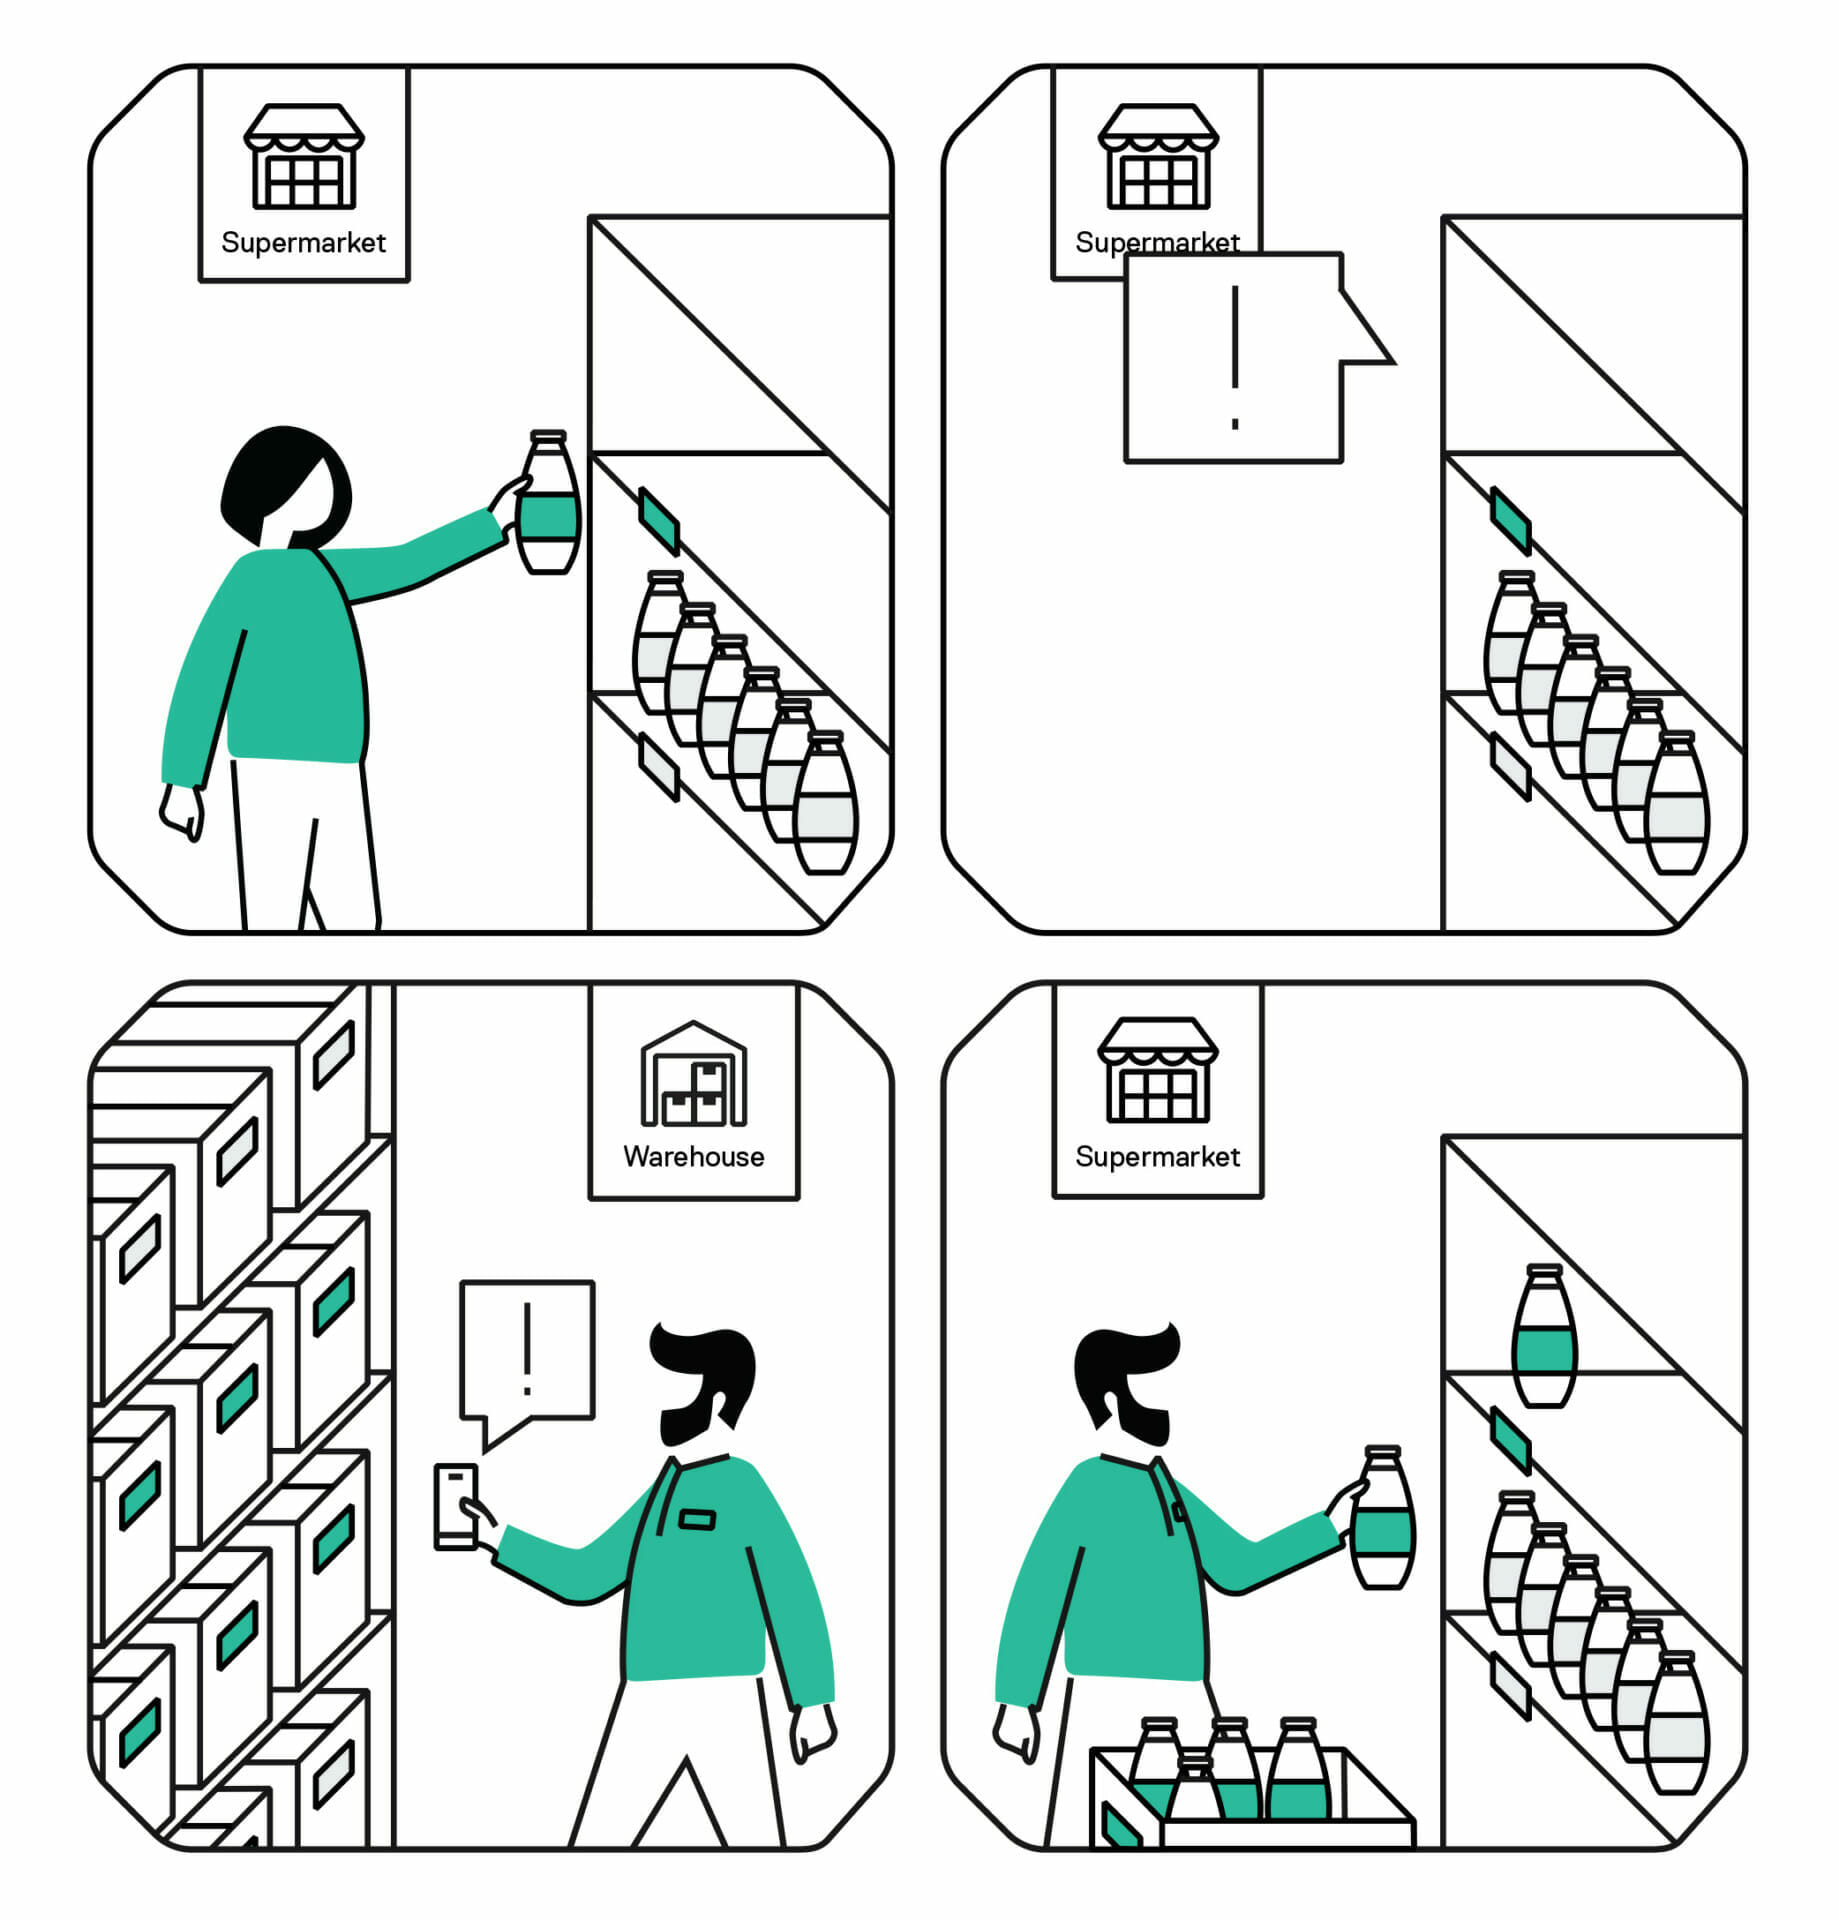 Four-panel illustration: top rows show a person finding an empty supermarket shelf; bottom rows depict a warehouse worker receiving a "smart storage" notification and then refilling the supermarket shelf.